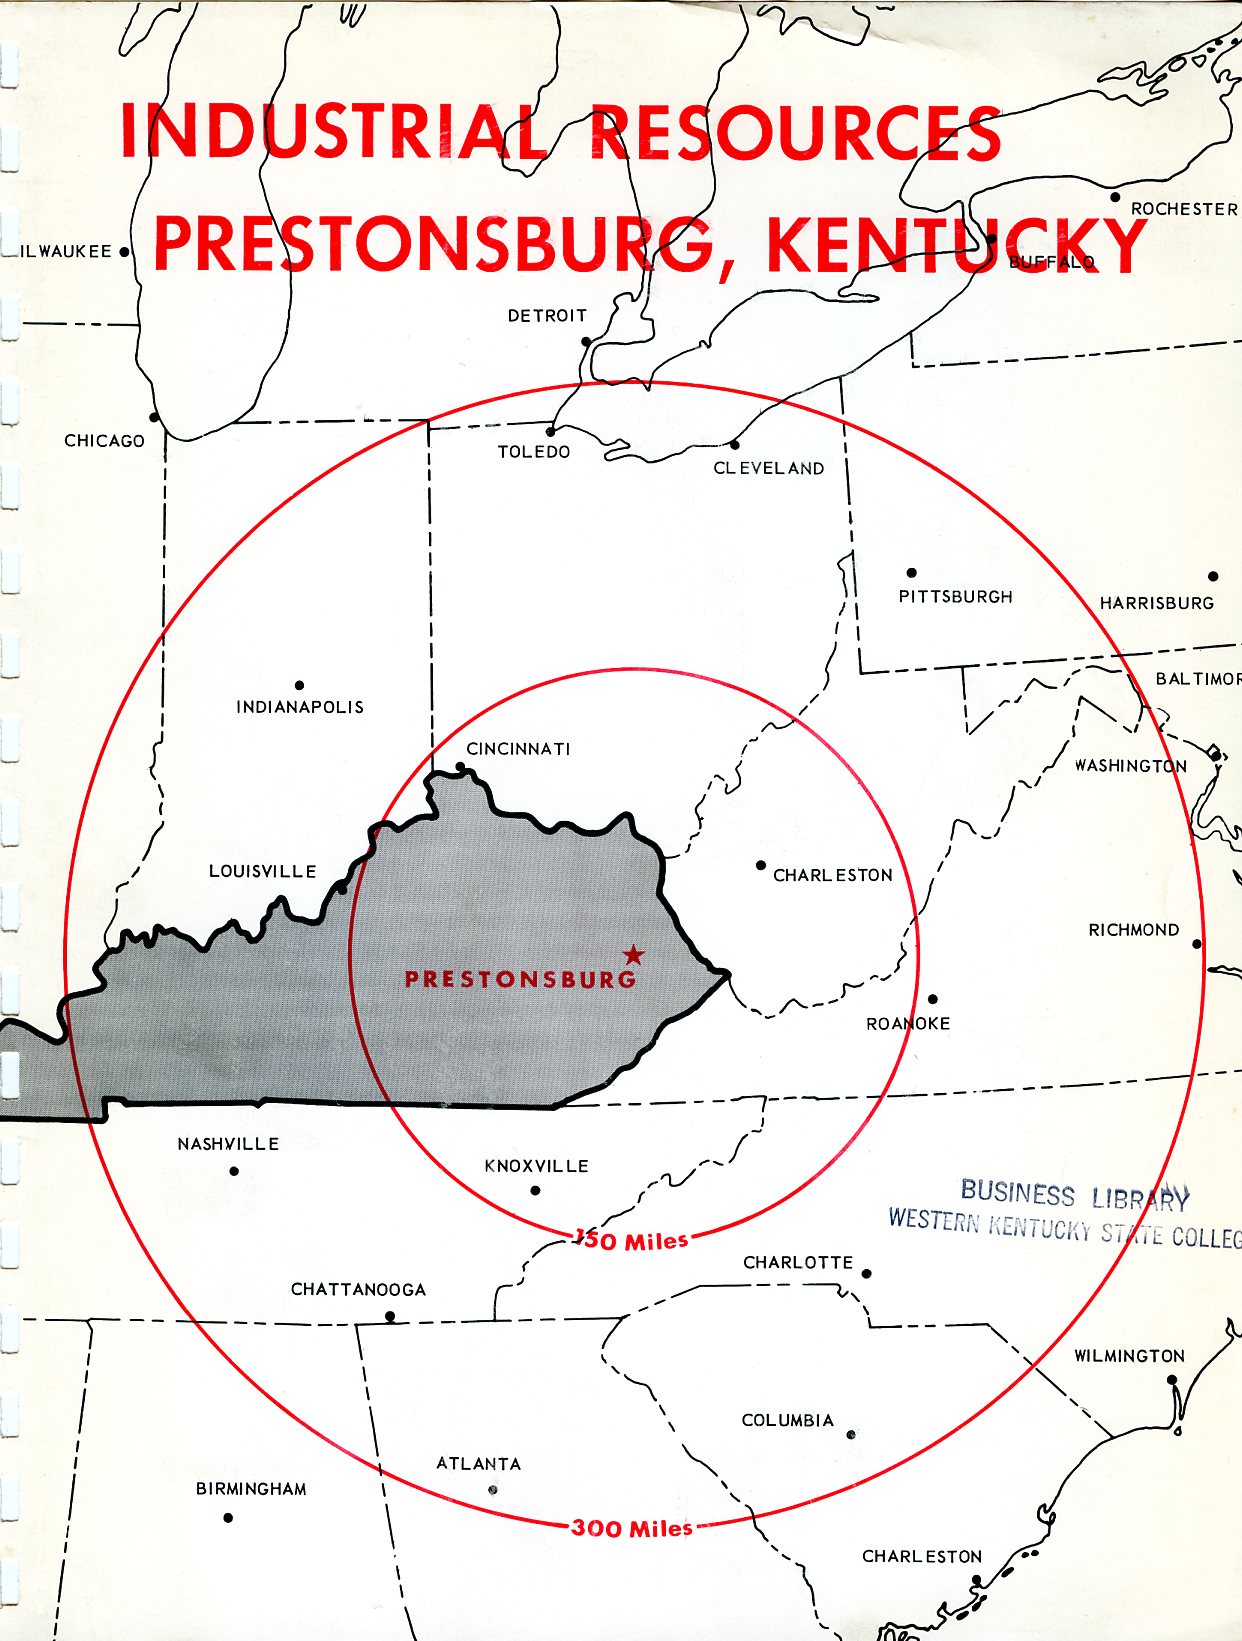 Industrial Reports for Kentucky Counties